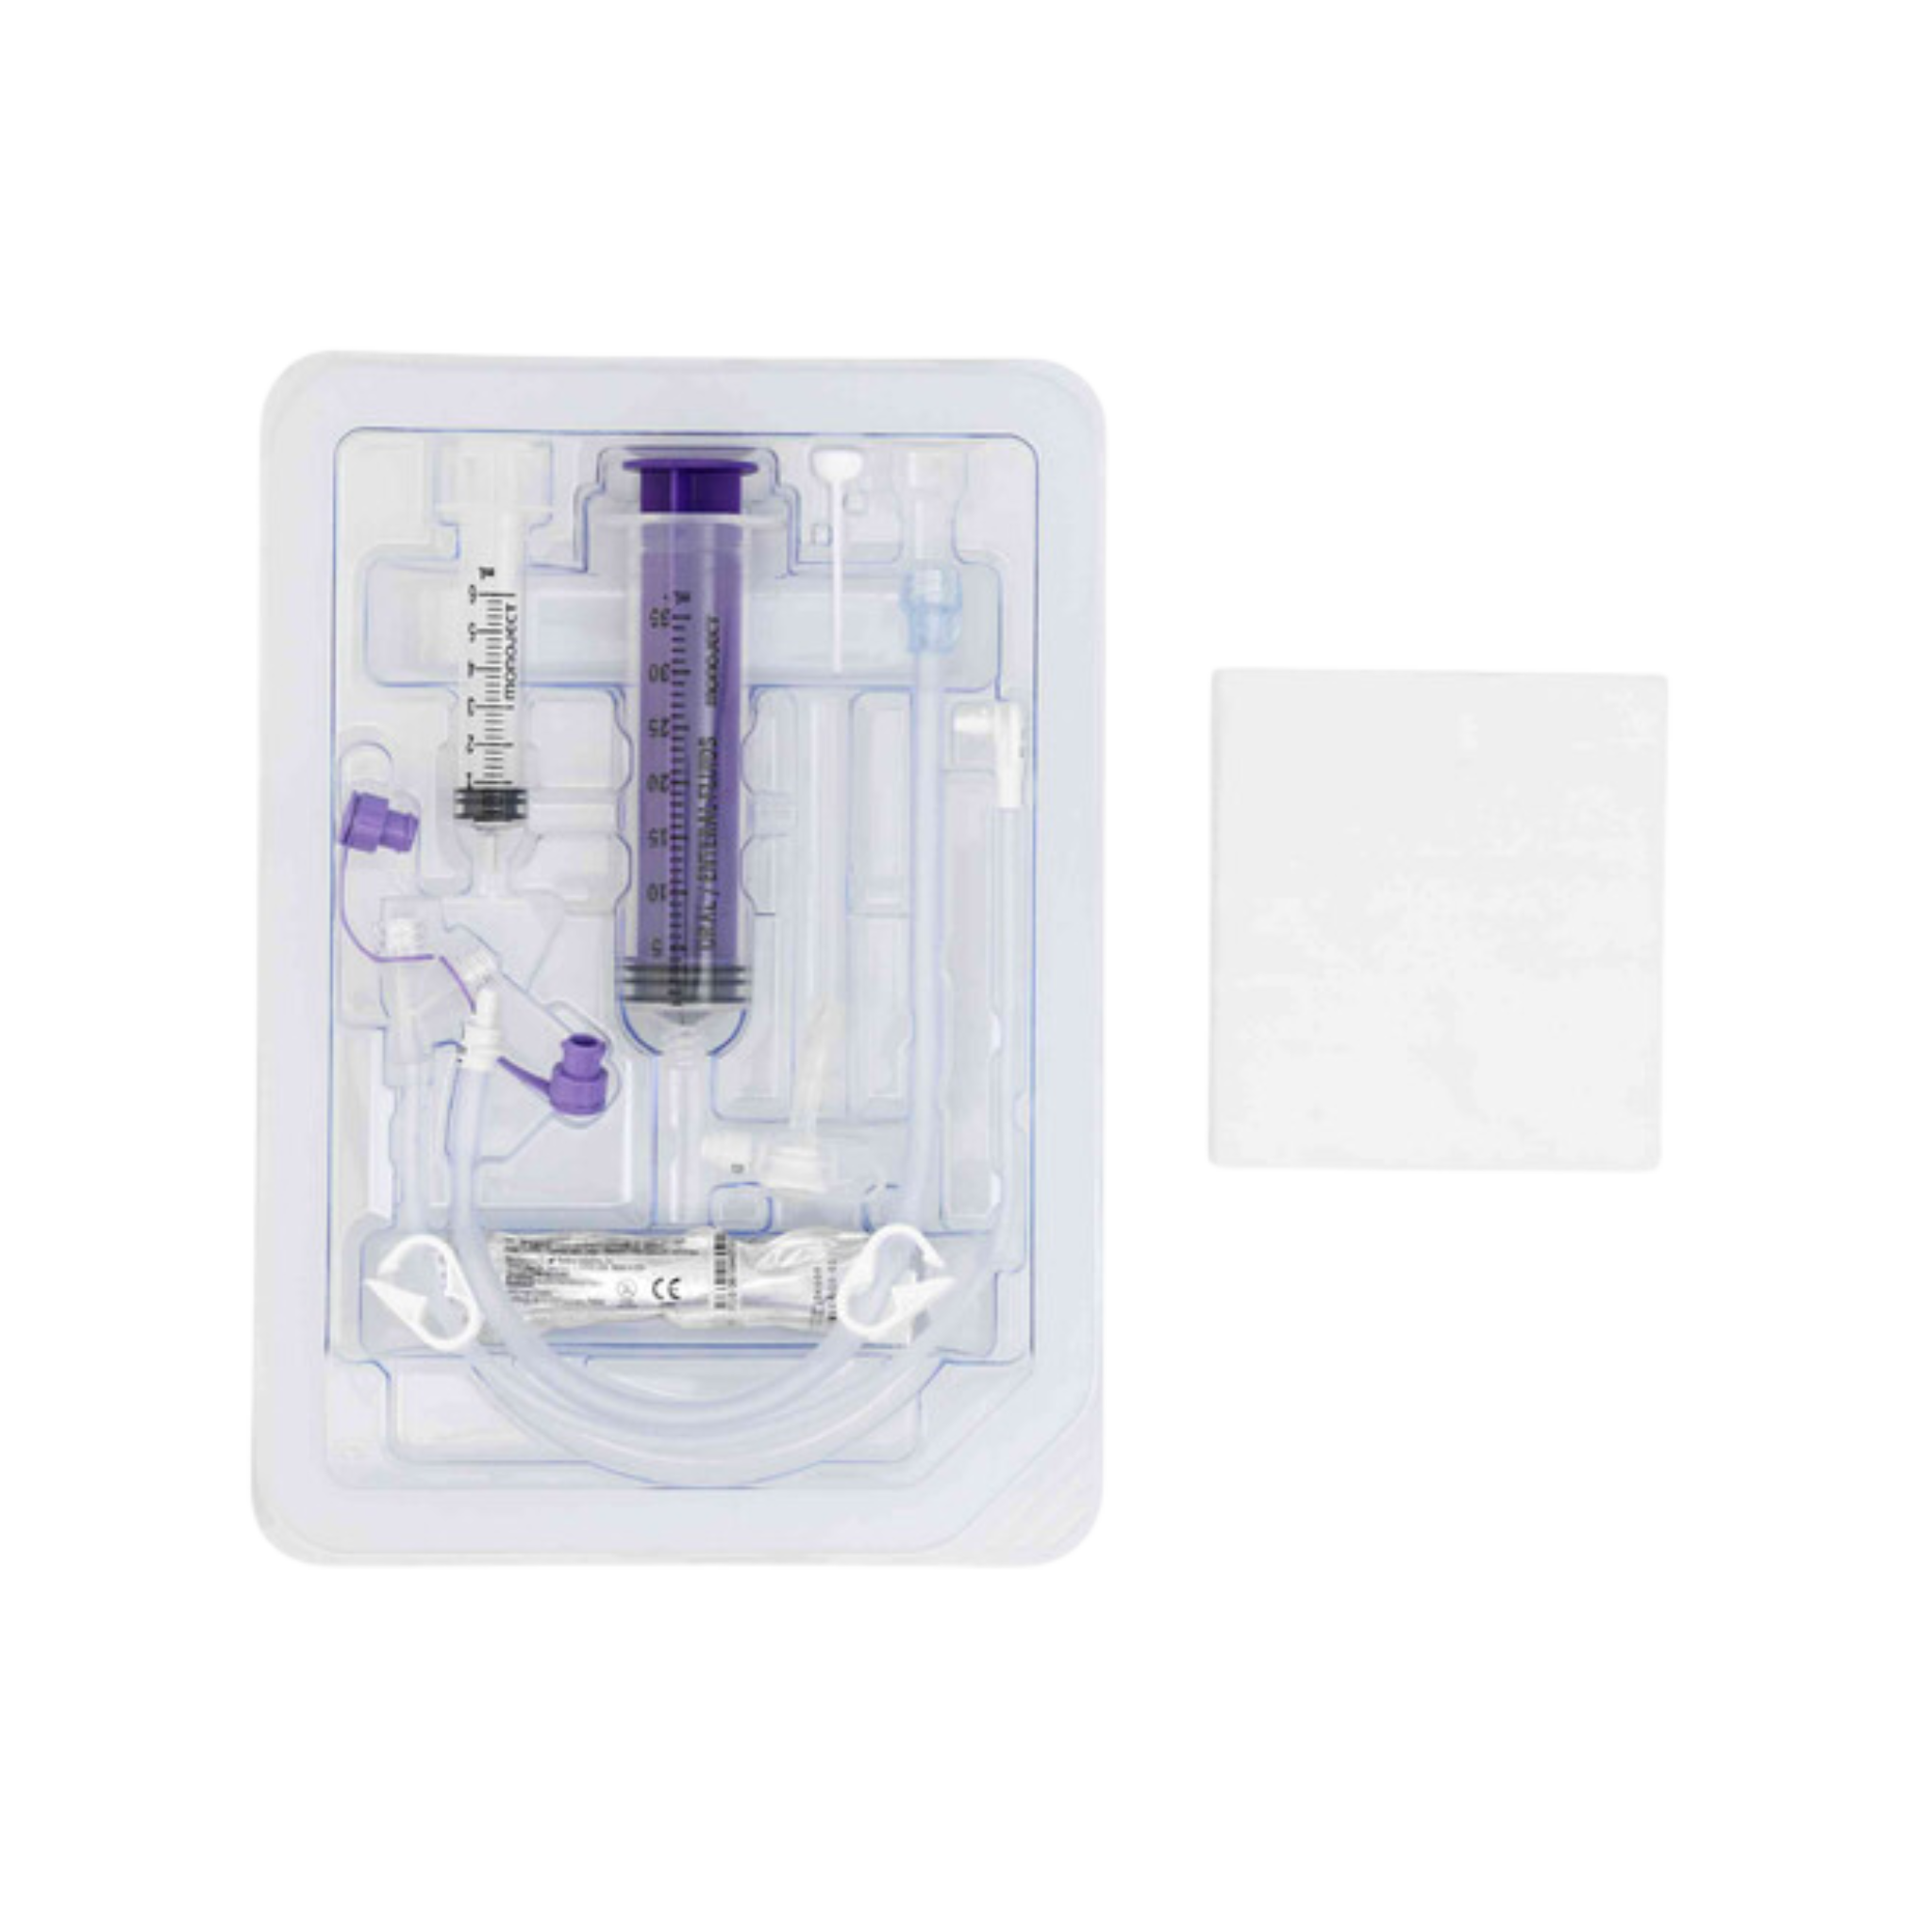 Avanos Mic-Key 16Fr Low-Profile Balloon Gastrostomy Feeding Tube Extension Sets With Enfit Connectors - All Length